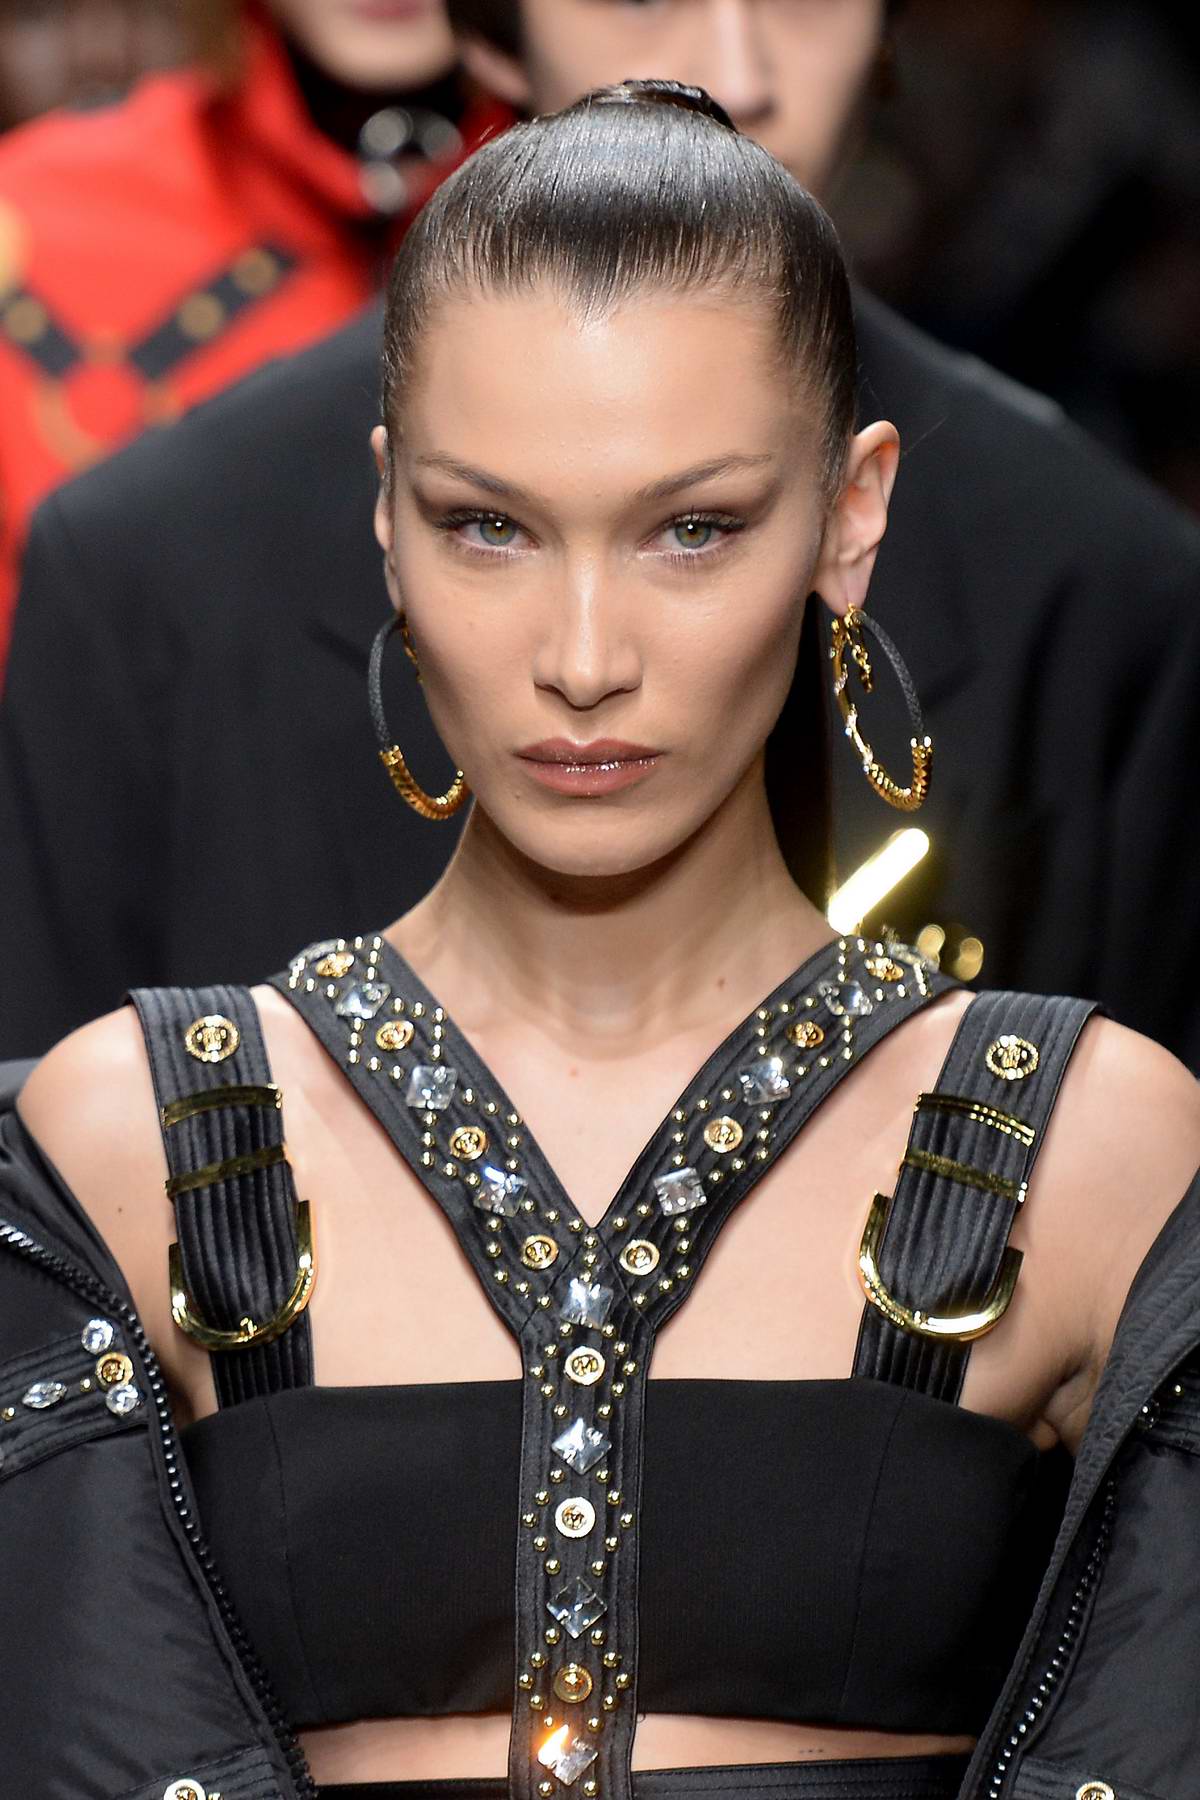 Bella Hadid Versace Fashion Show in Milan September 20, 2019 – Star Style